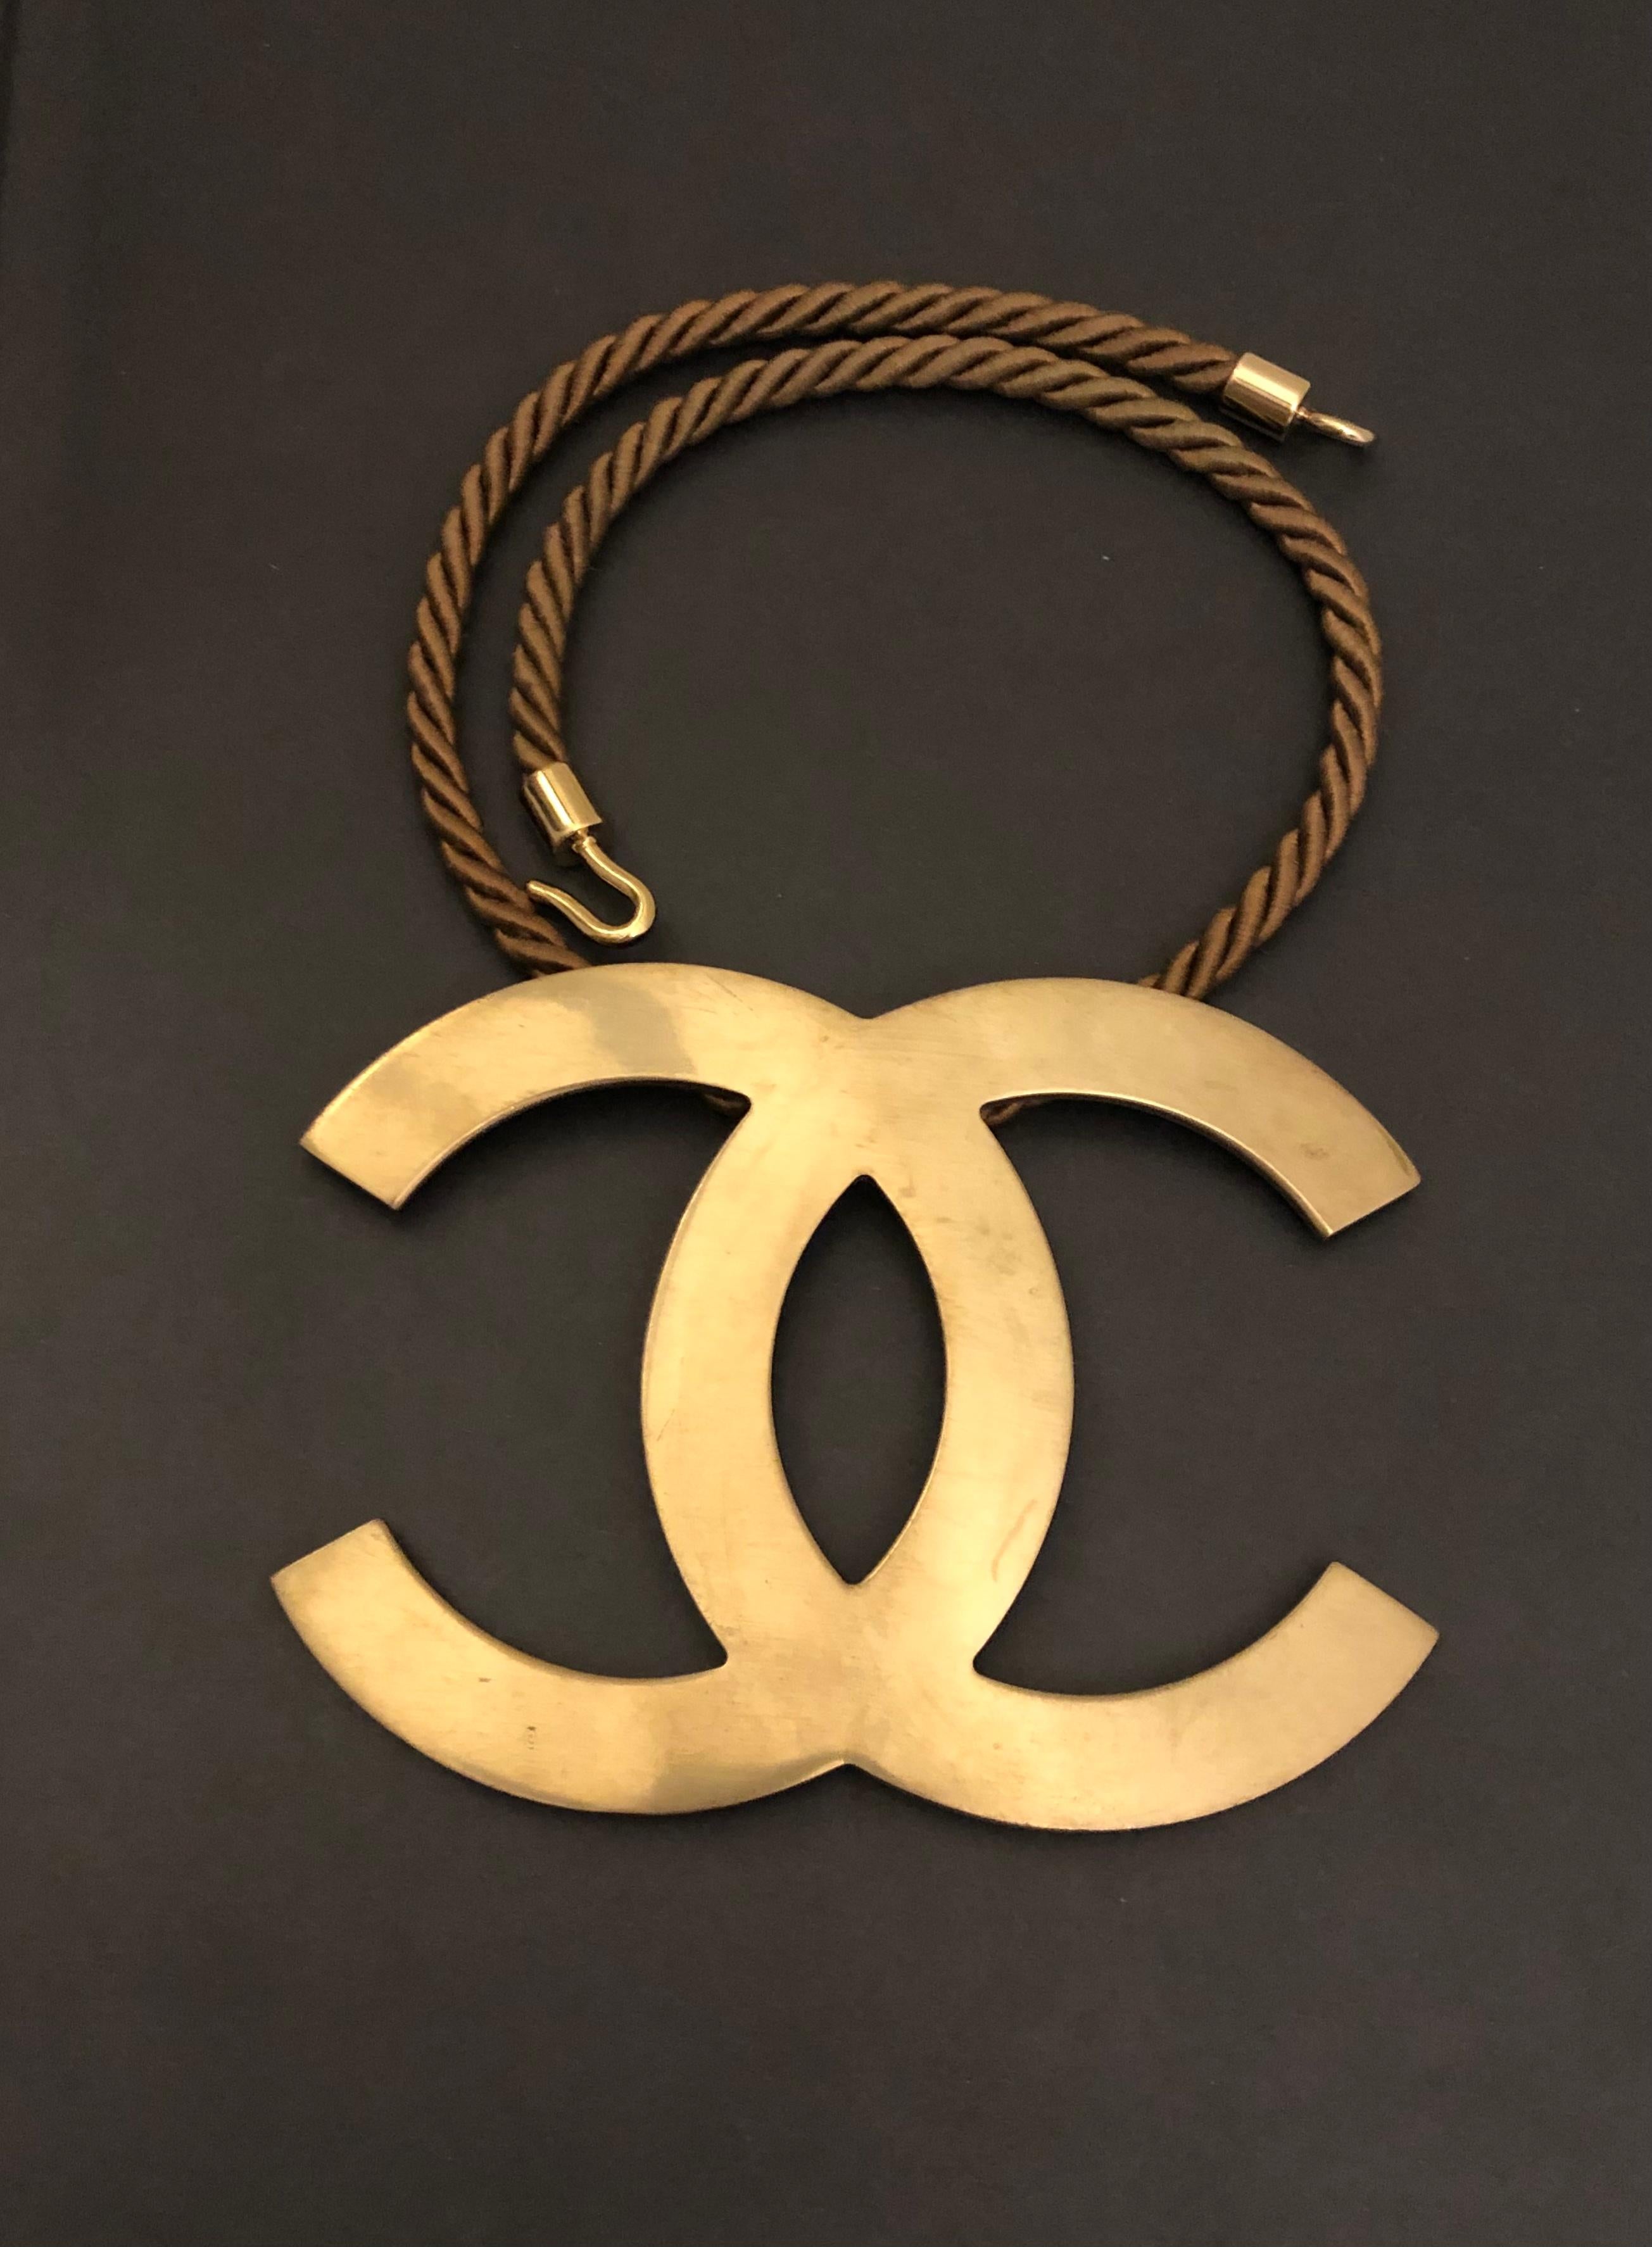 This CHANEL massive statement necklace is crafted of gold toned metal featuring a massive CC charm and silk rope in brown. Length measures approximately 40 cm Charm 10 x 8 cm. Stamped Chanel 05P made in France. 

Condition - Excellent with minimal